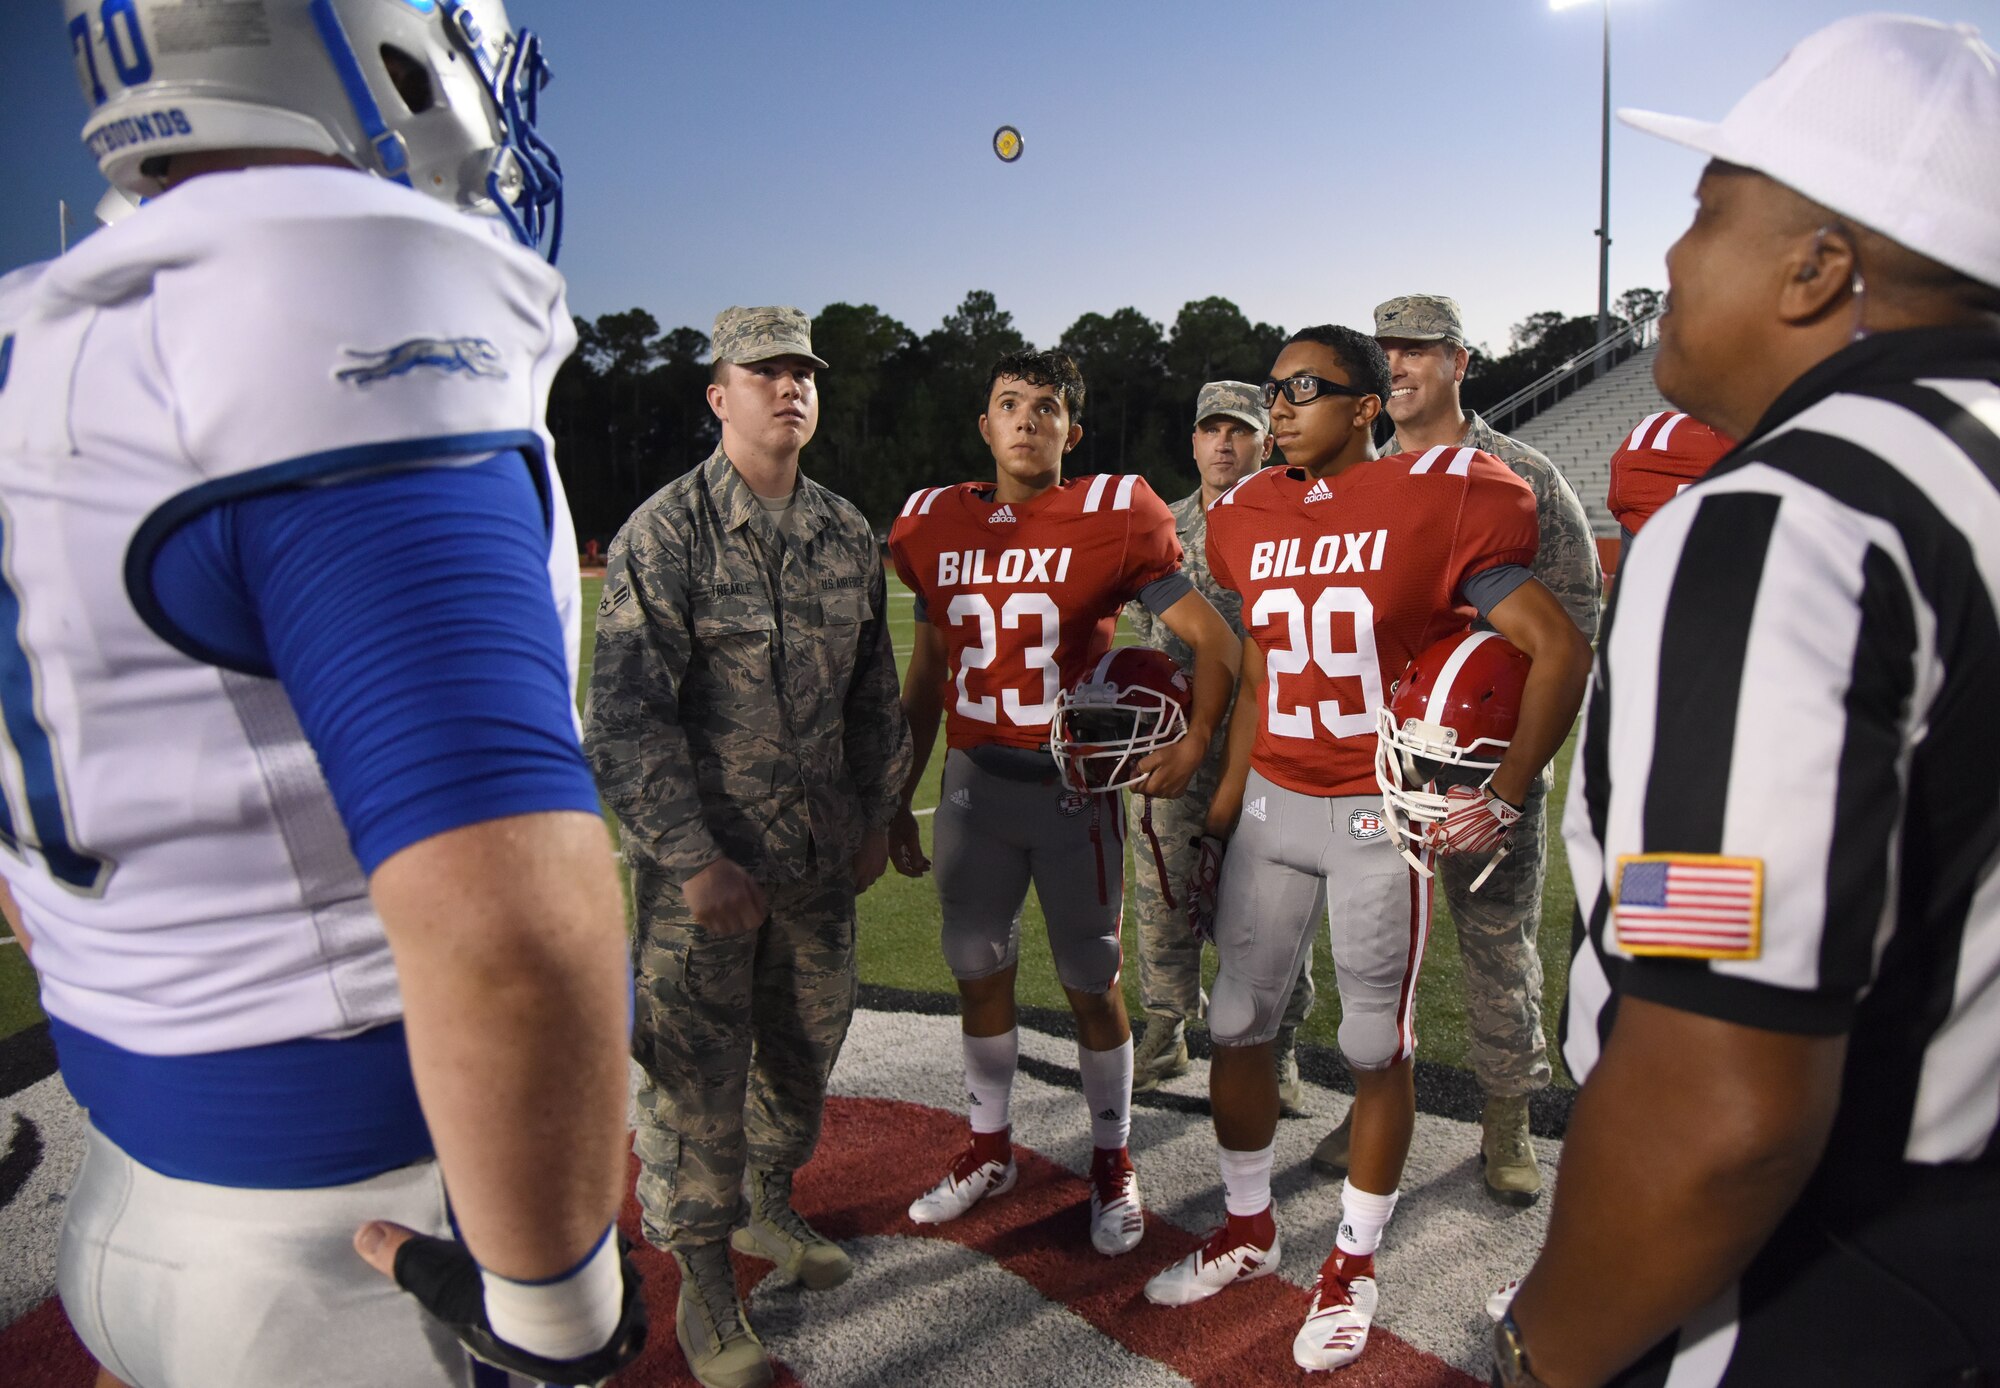 U.S. Air Force Airman 1st Class Mark Treakle, 338th Training Squadron student, and Keesler leadership participate in the coin toss to determine which team would receive the ball first during a Biloxi High School military appreciation night football game in Biloxi, Mississippi, Oct. 5, 2018. Treakle is a 2018 graduate of BHS. Keesler Airmen also participated in other pre-game festivities such as holding the U.S. Flag during the playing of the national anthem. (U.S. Air Force photo by Kemberly Groue)